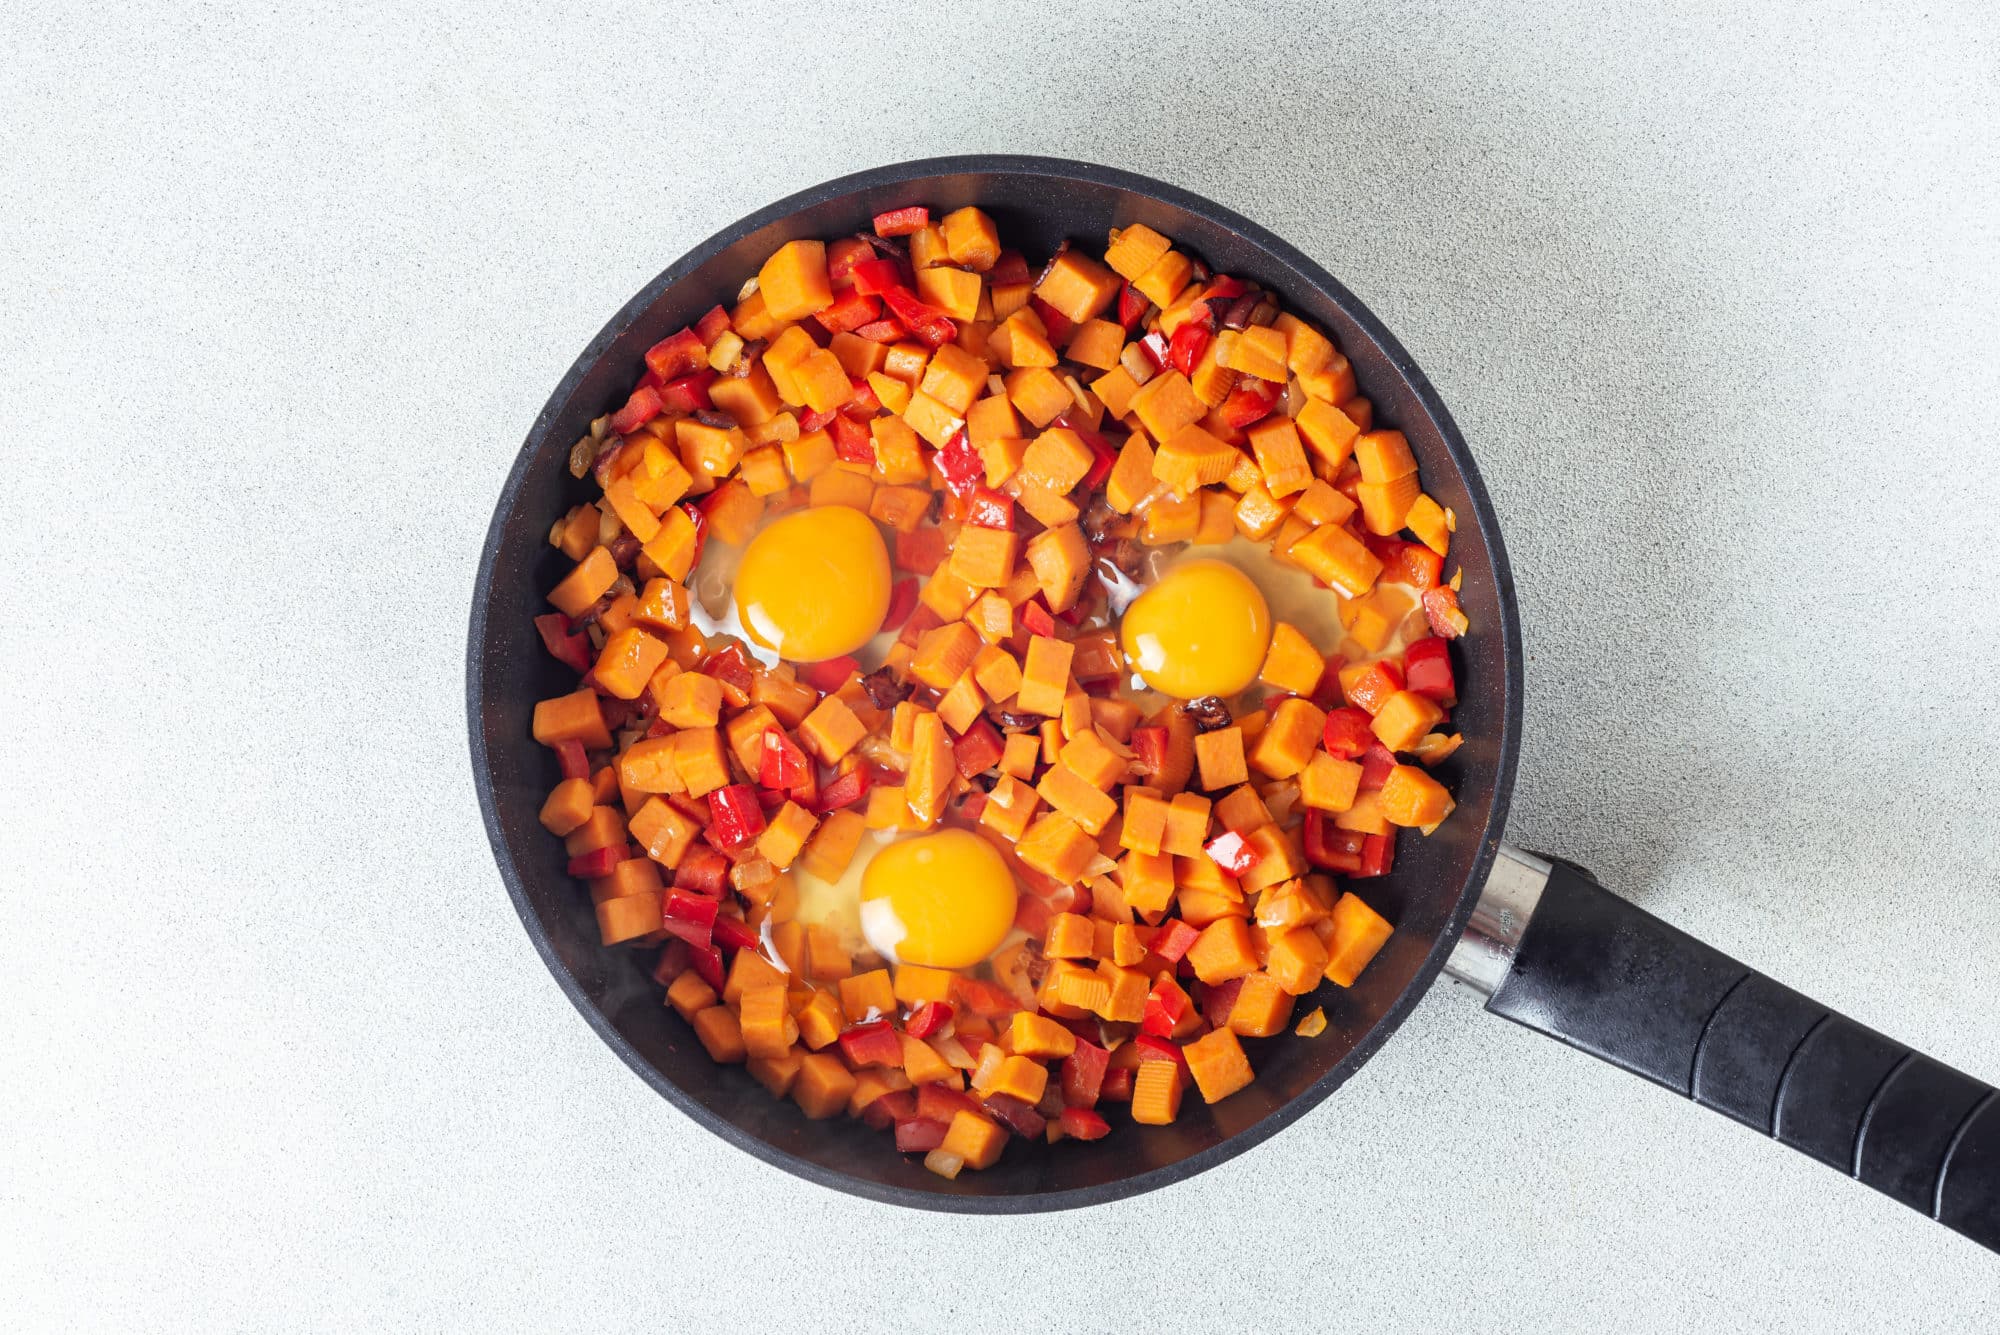 sweet potatoes and red bell peppers with cracked raw eggs in a black pan.